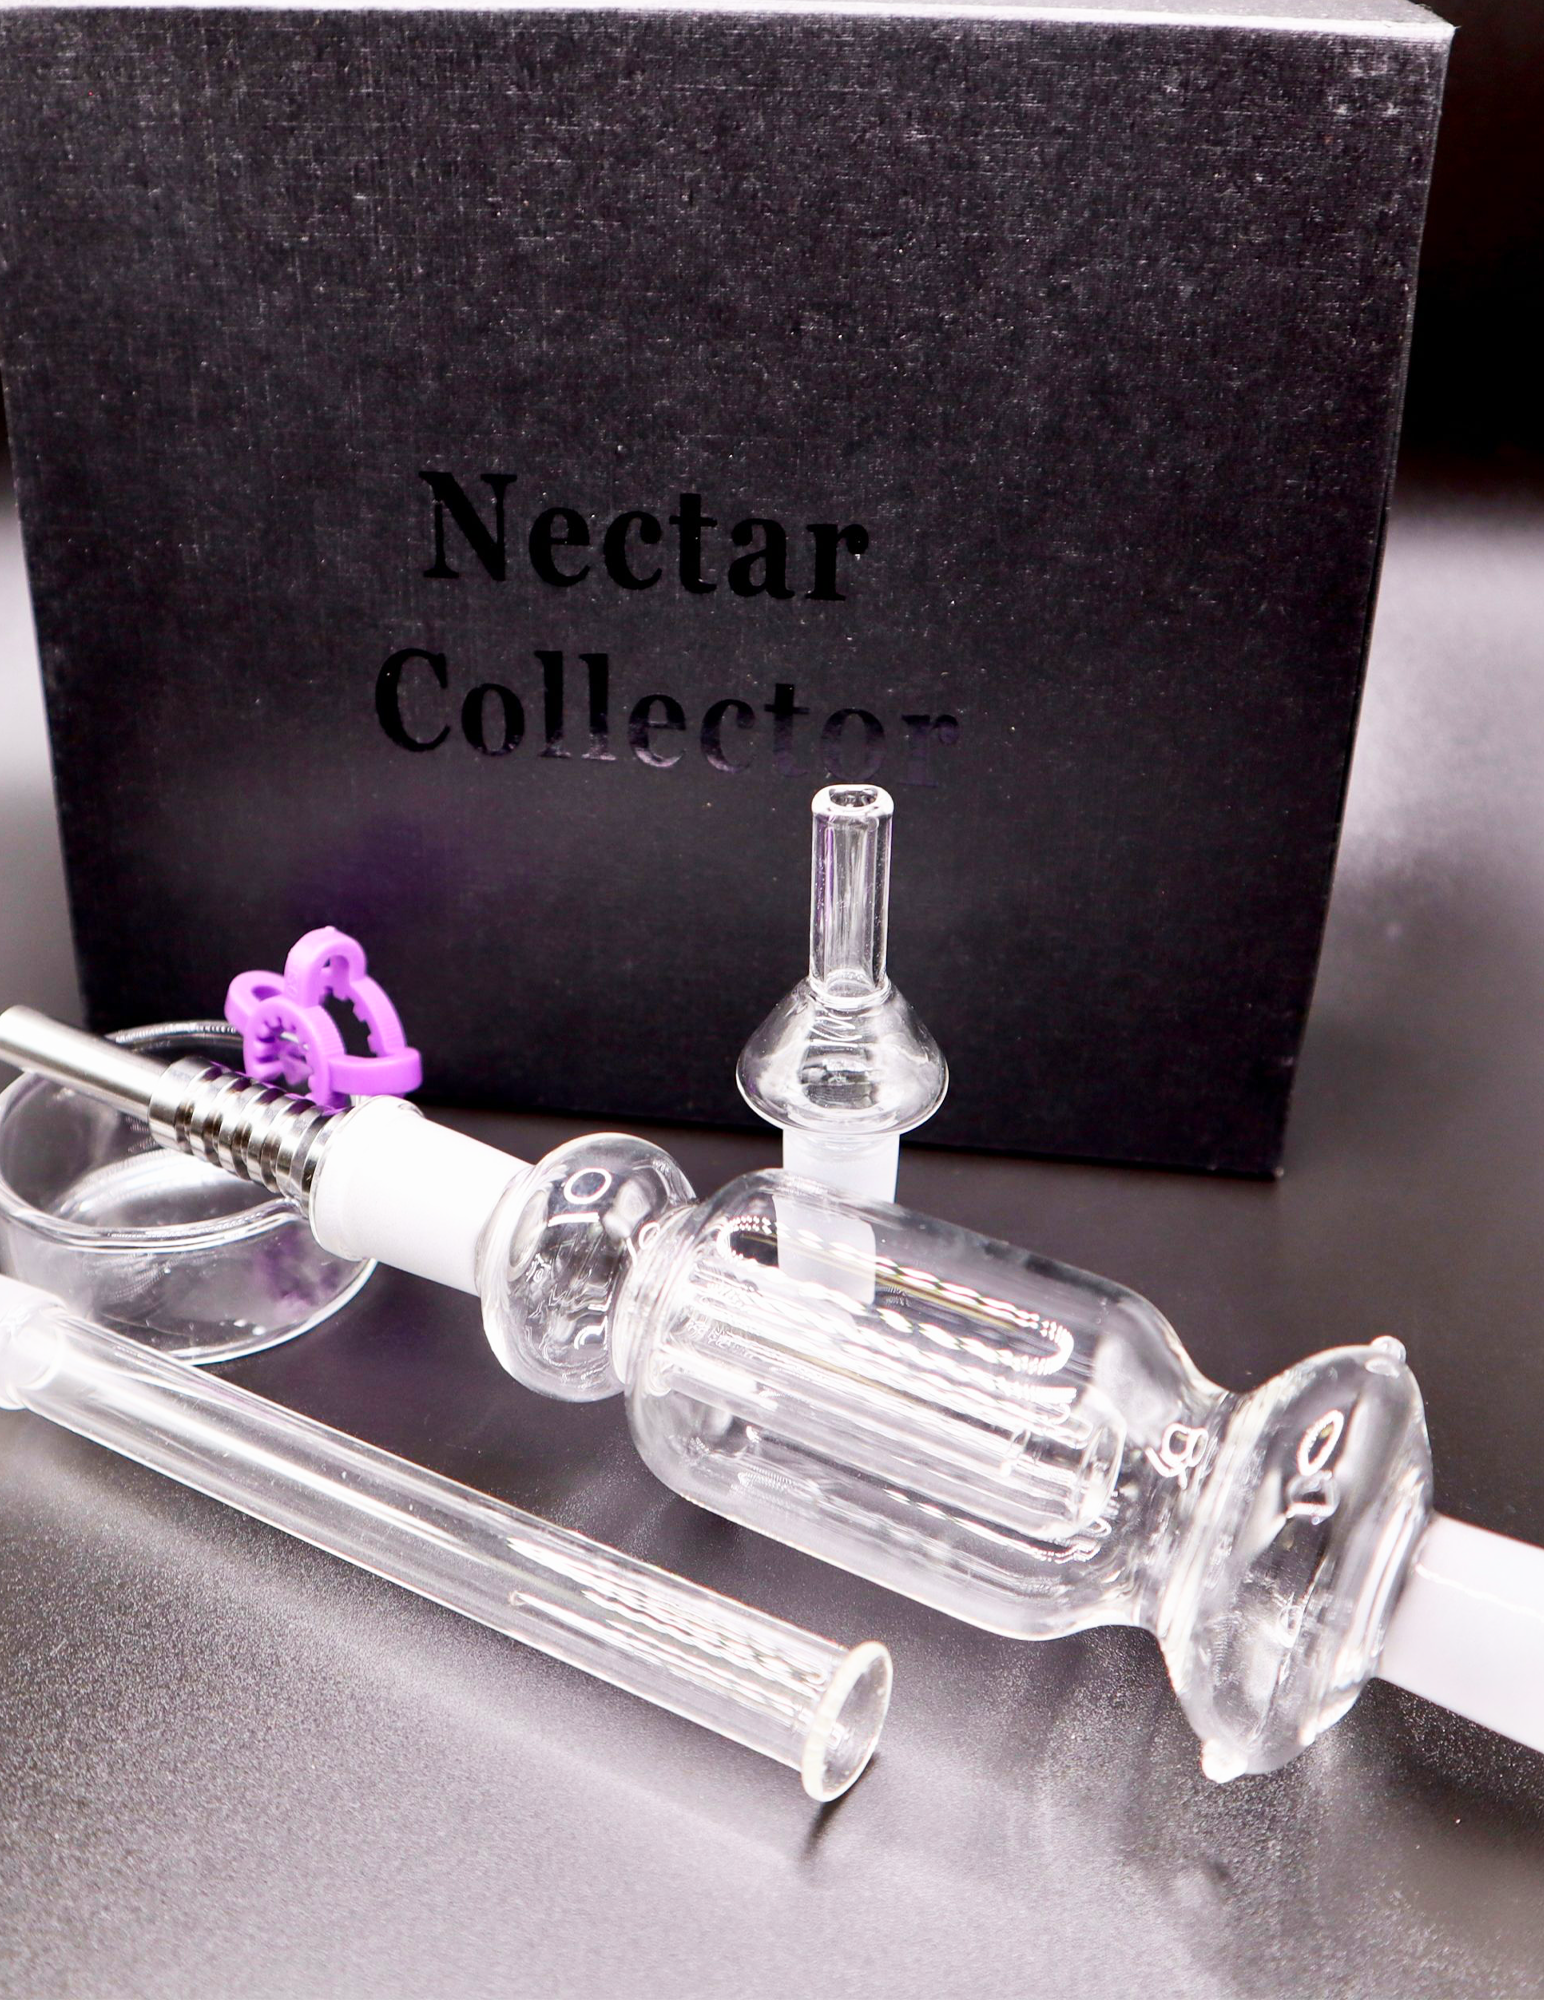 https://topfivewholesale.com/wp-content/uploads/2022/10/NC003-14mm-Black-Box-Nectar-Collector-Kit-with-Titanium-Glass-Tips-2.png